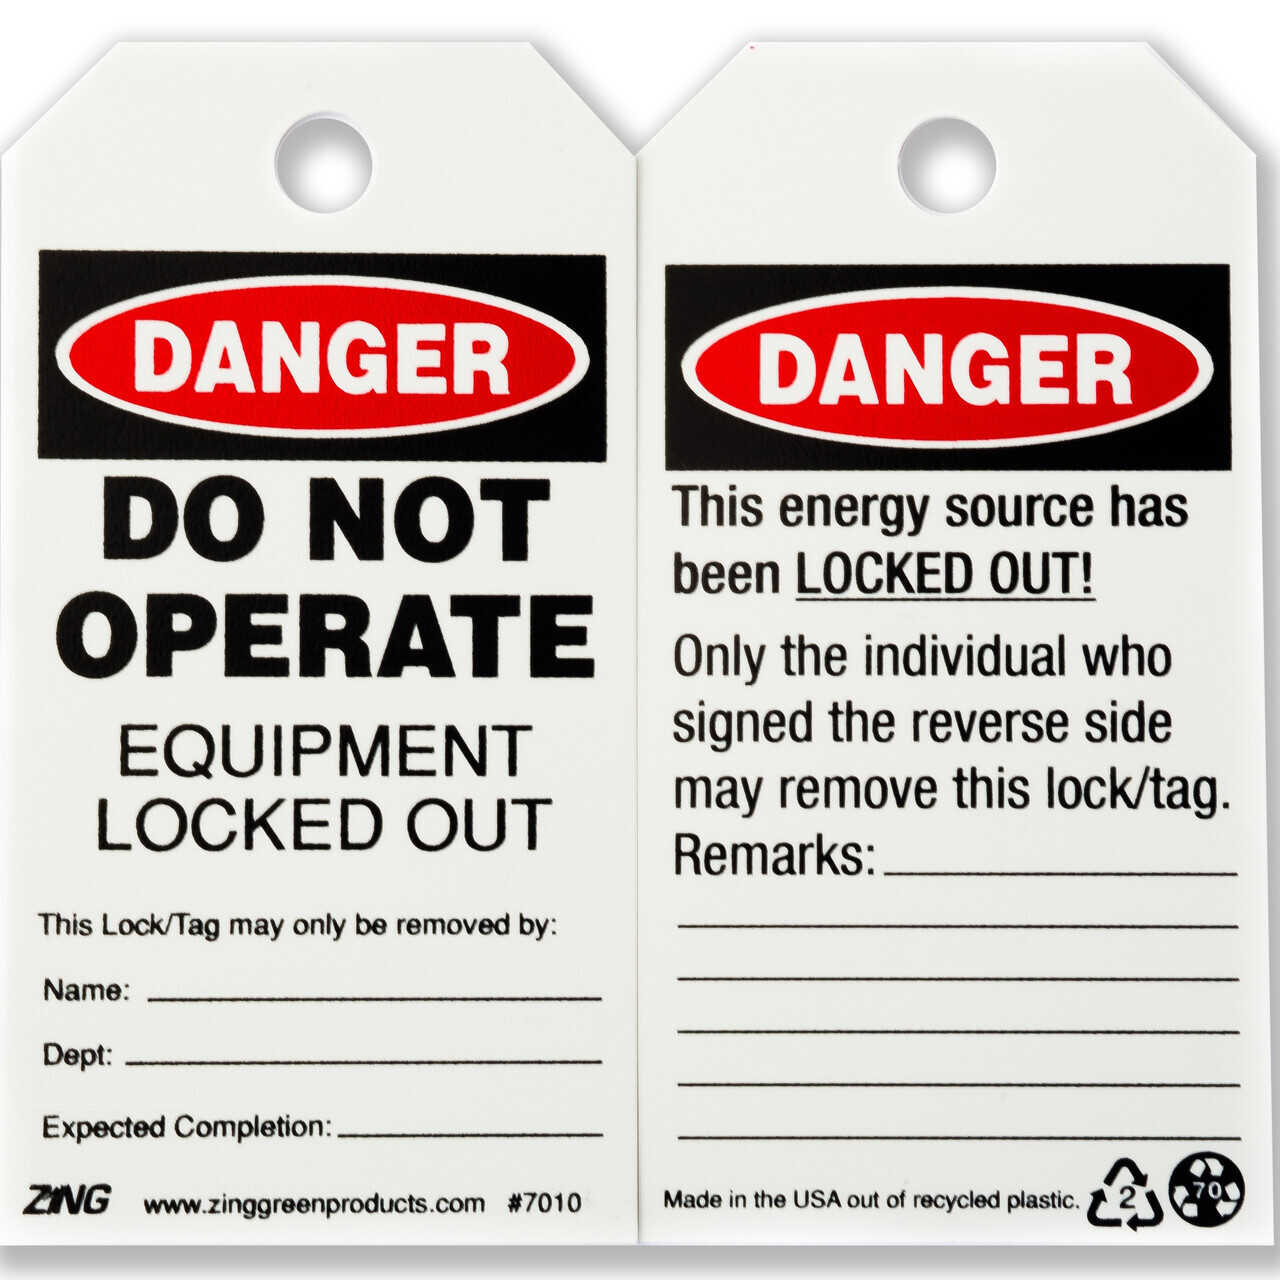 50 PACK Danger Safety Warning Do Not Use Labels or Tags 